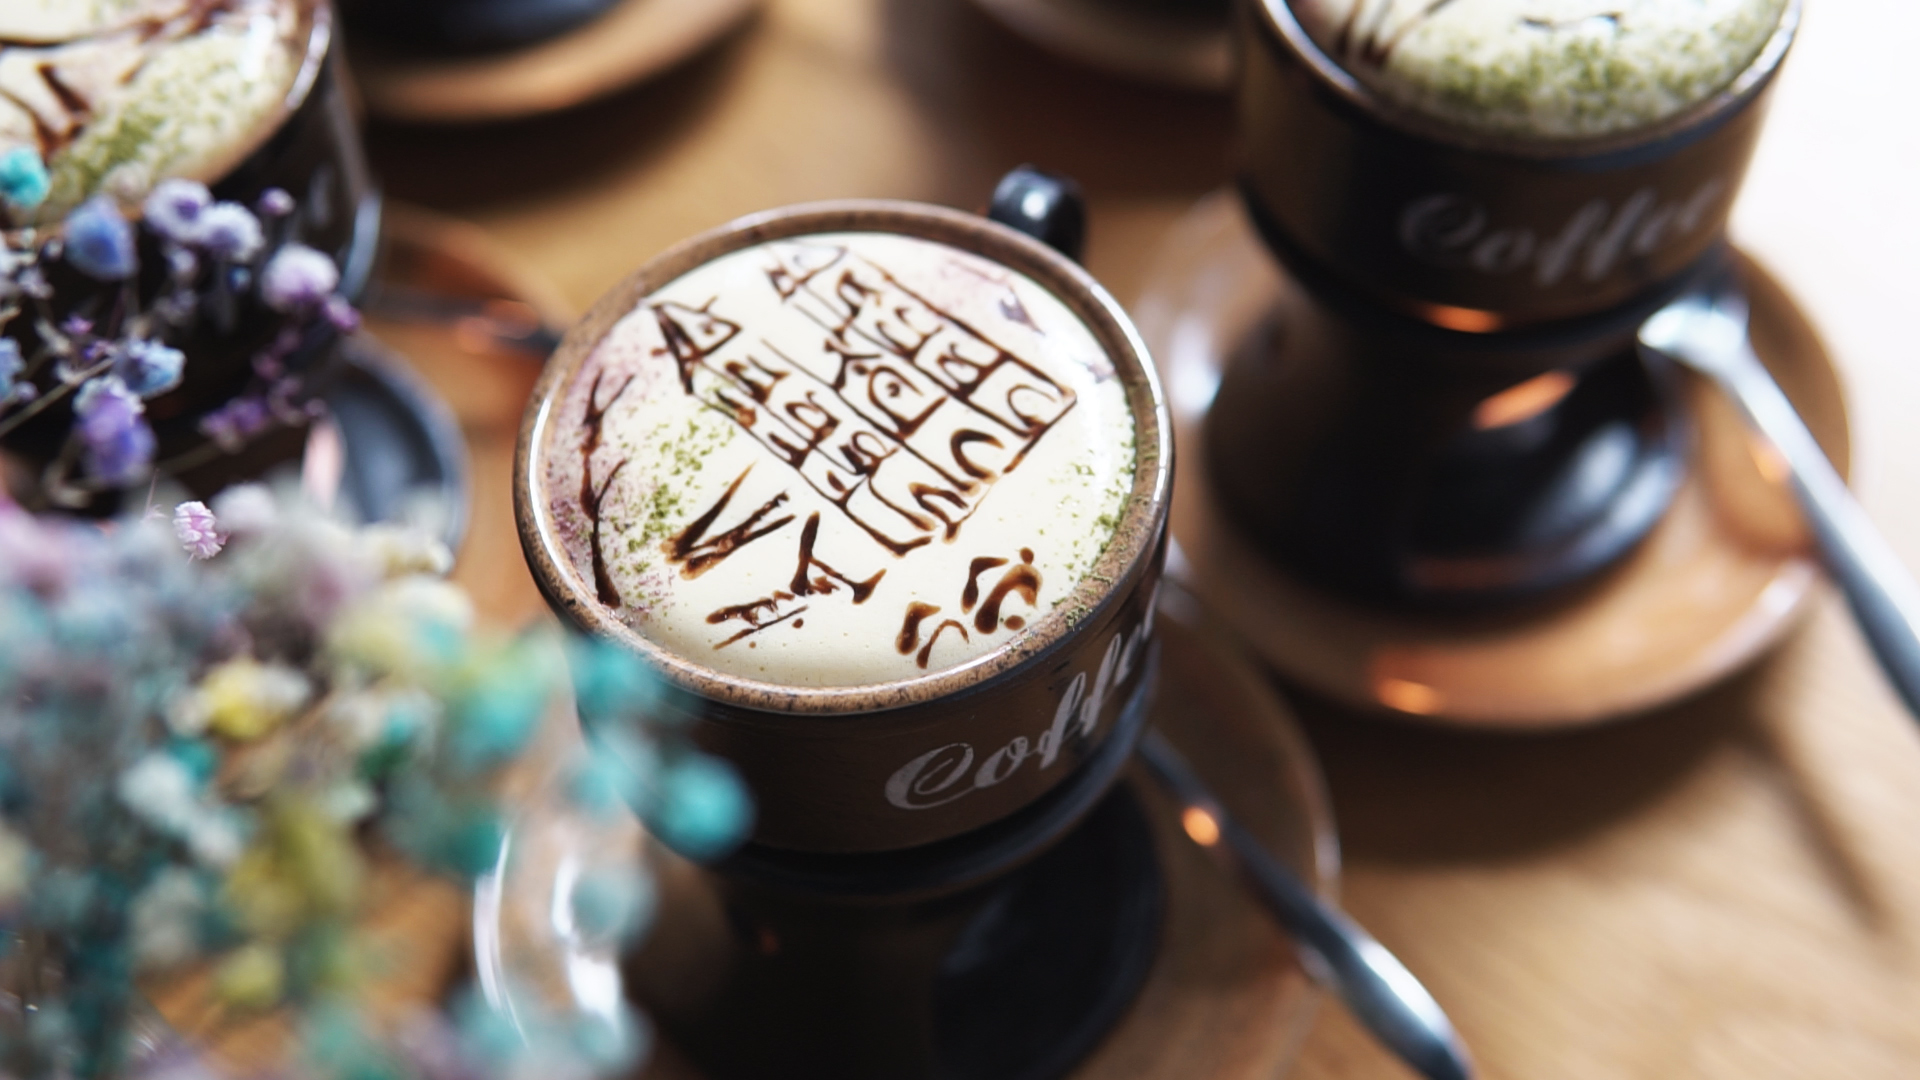 Saigon café serves up egg coffee with Vietnam’s stunning sites on froth